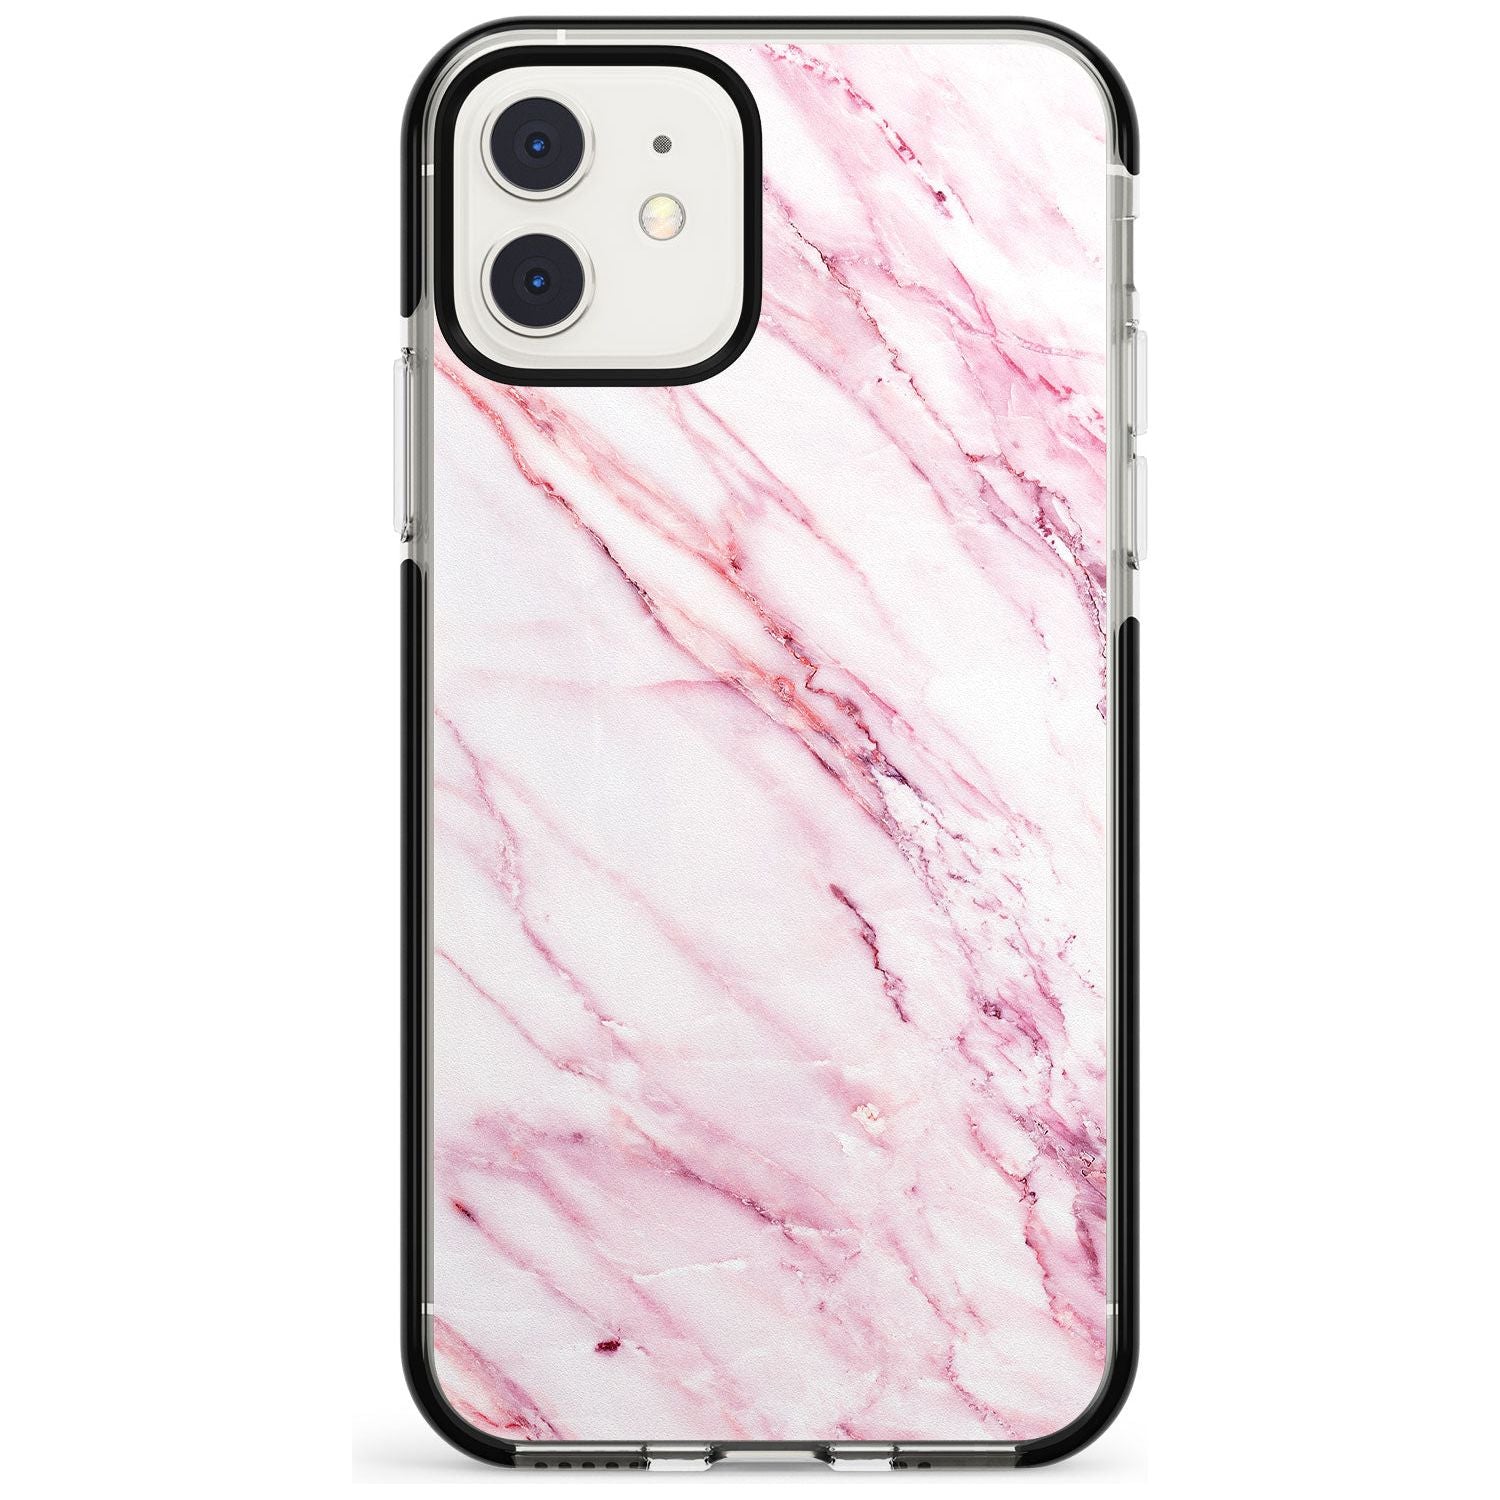 White & Pink Onyx Marble Texture Pink Fade Impact Phone Case for iPhone 11 Pro Max